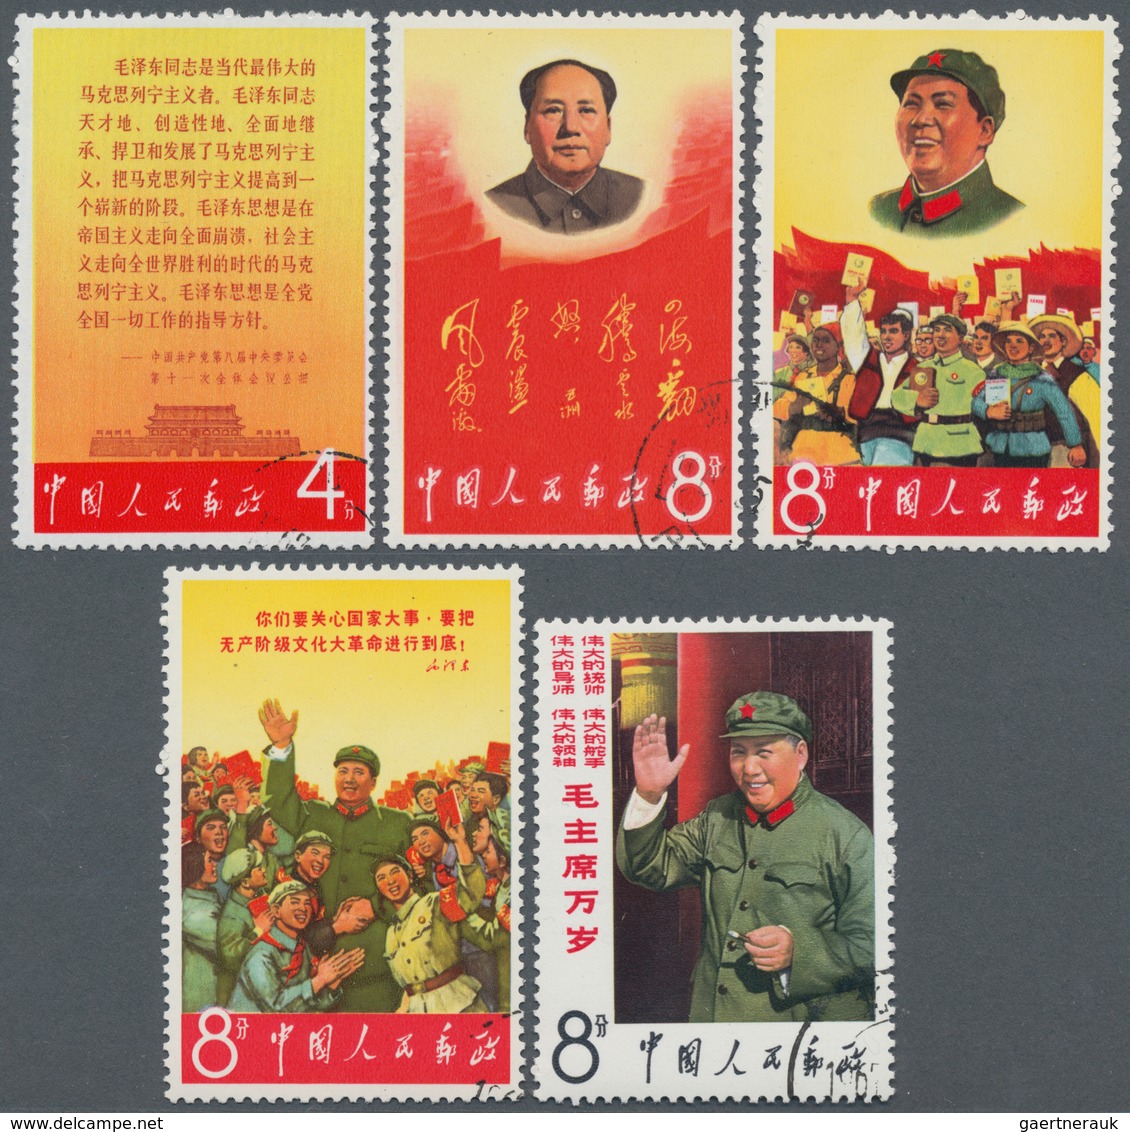 China - Volksrepublik: 1967, Mao's Thesis III (W2), Two Used Sets. Michel Cat.value 440,- €. - Briefe U. Dokumente